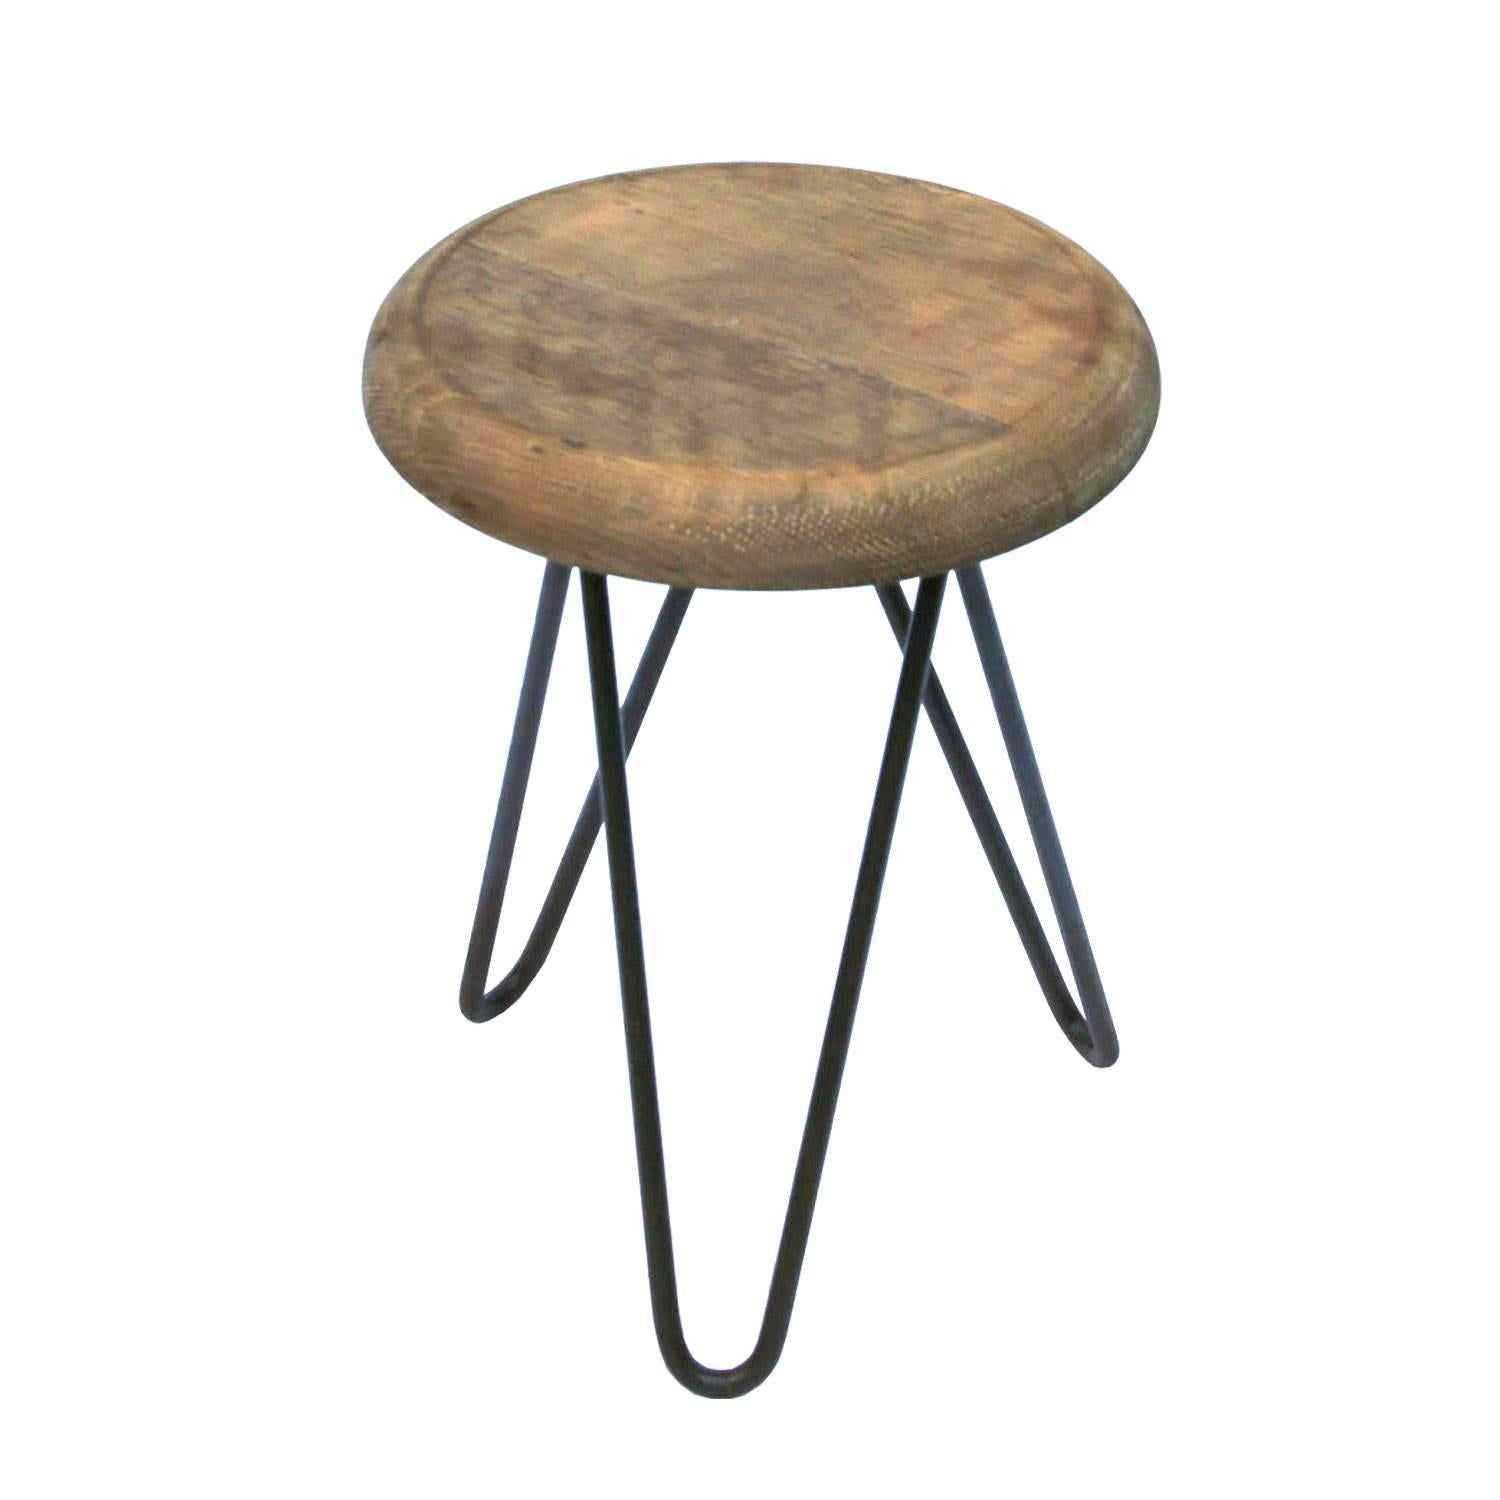 Classic design, beautiful in simplicity, clear lines and timeless shape. 
Original military stools from East-European airbase.

Priced per individual item. Contact us for shipping prices for larger quantities.